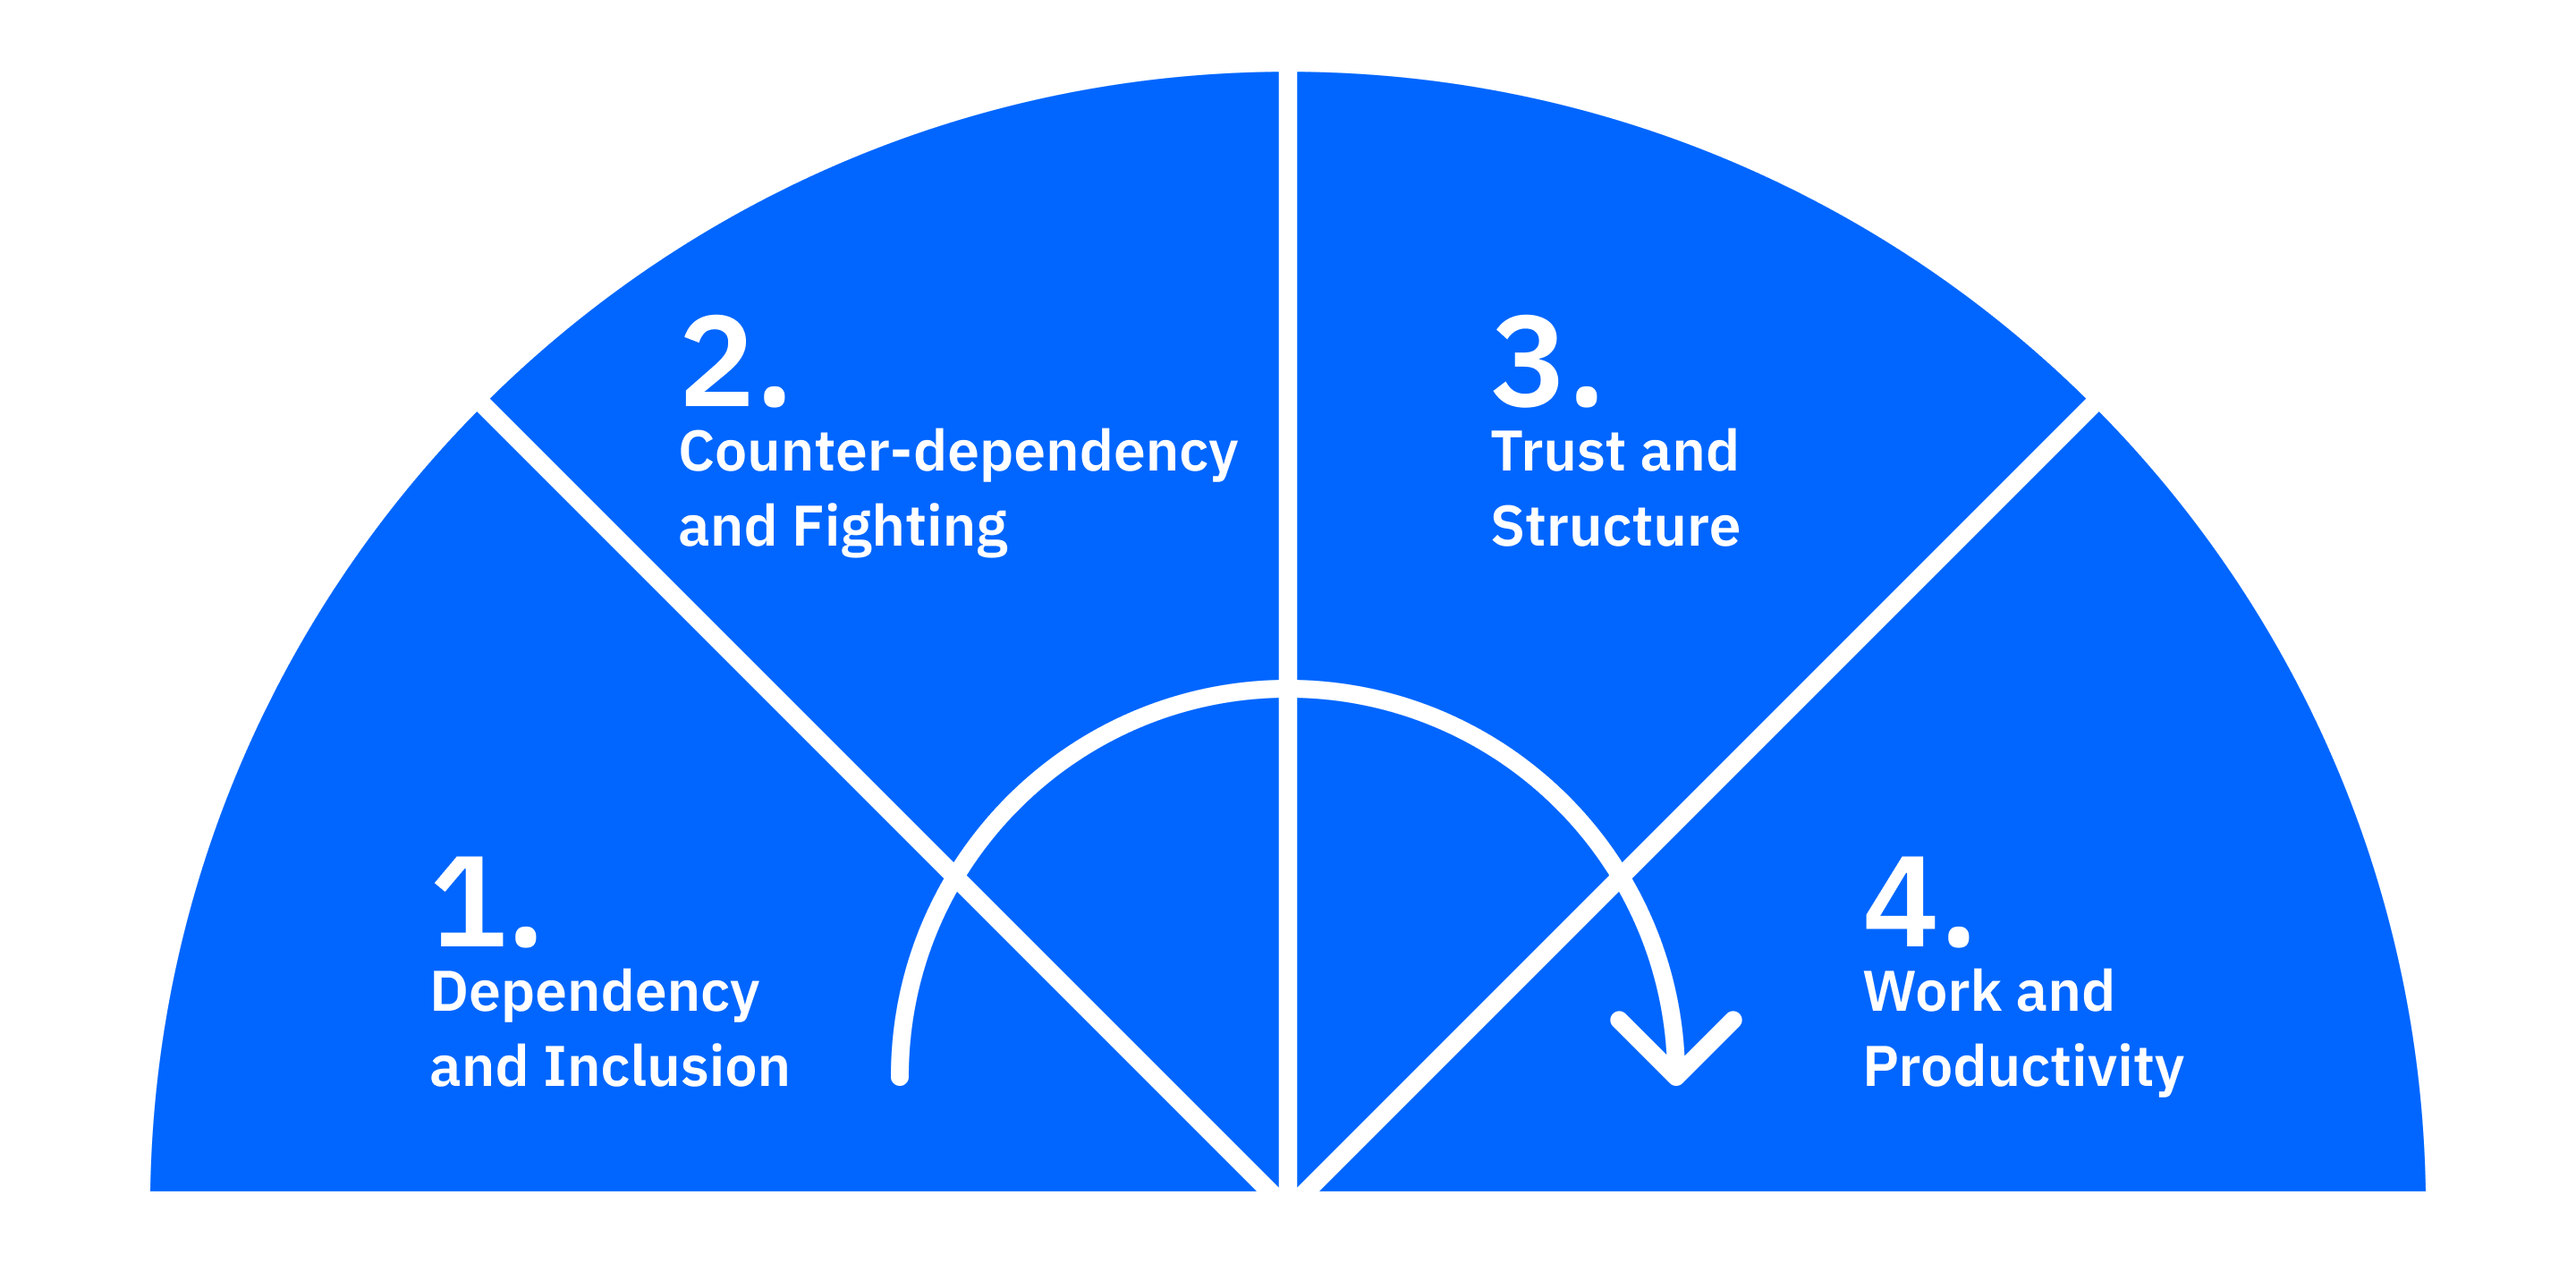 Susan Wheelan Team Development Diagram. Left to Right: 1. Dependency and inclusion 2. Counter-dependency and fighting 3. Trust and structure 4. Work and productivity